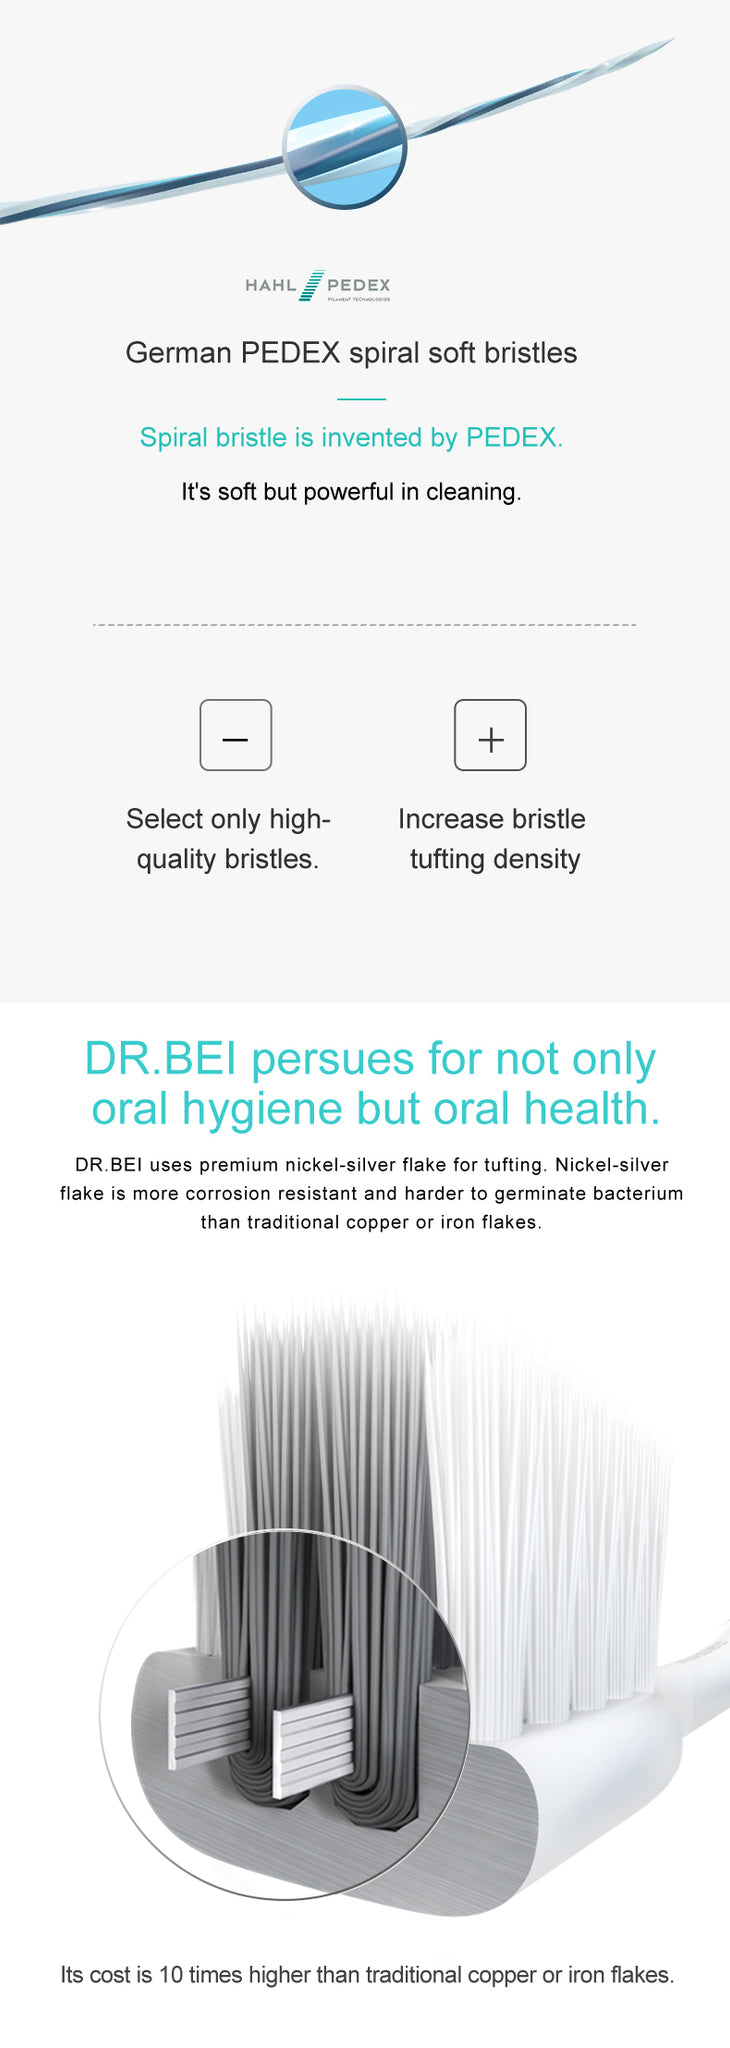 DR.BEI Bass Toothbrush, 4 Pieces (Xiaomi Version) Xiaomi Youpin DR.BEI Xiaomi Tooth Mi Bass Method Sandwish-bedded Better Brush Wire 4Colors Deep Cleaning Toothbrush